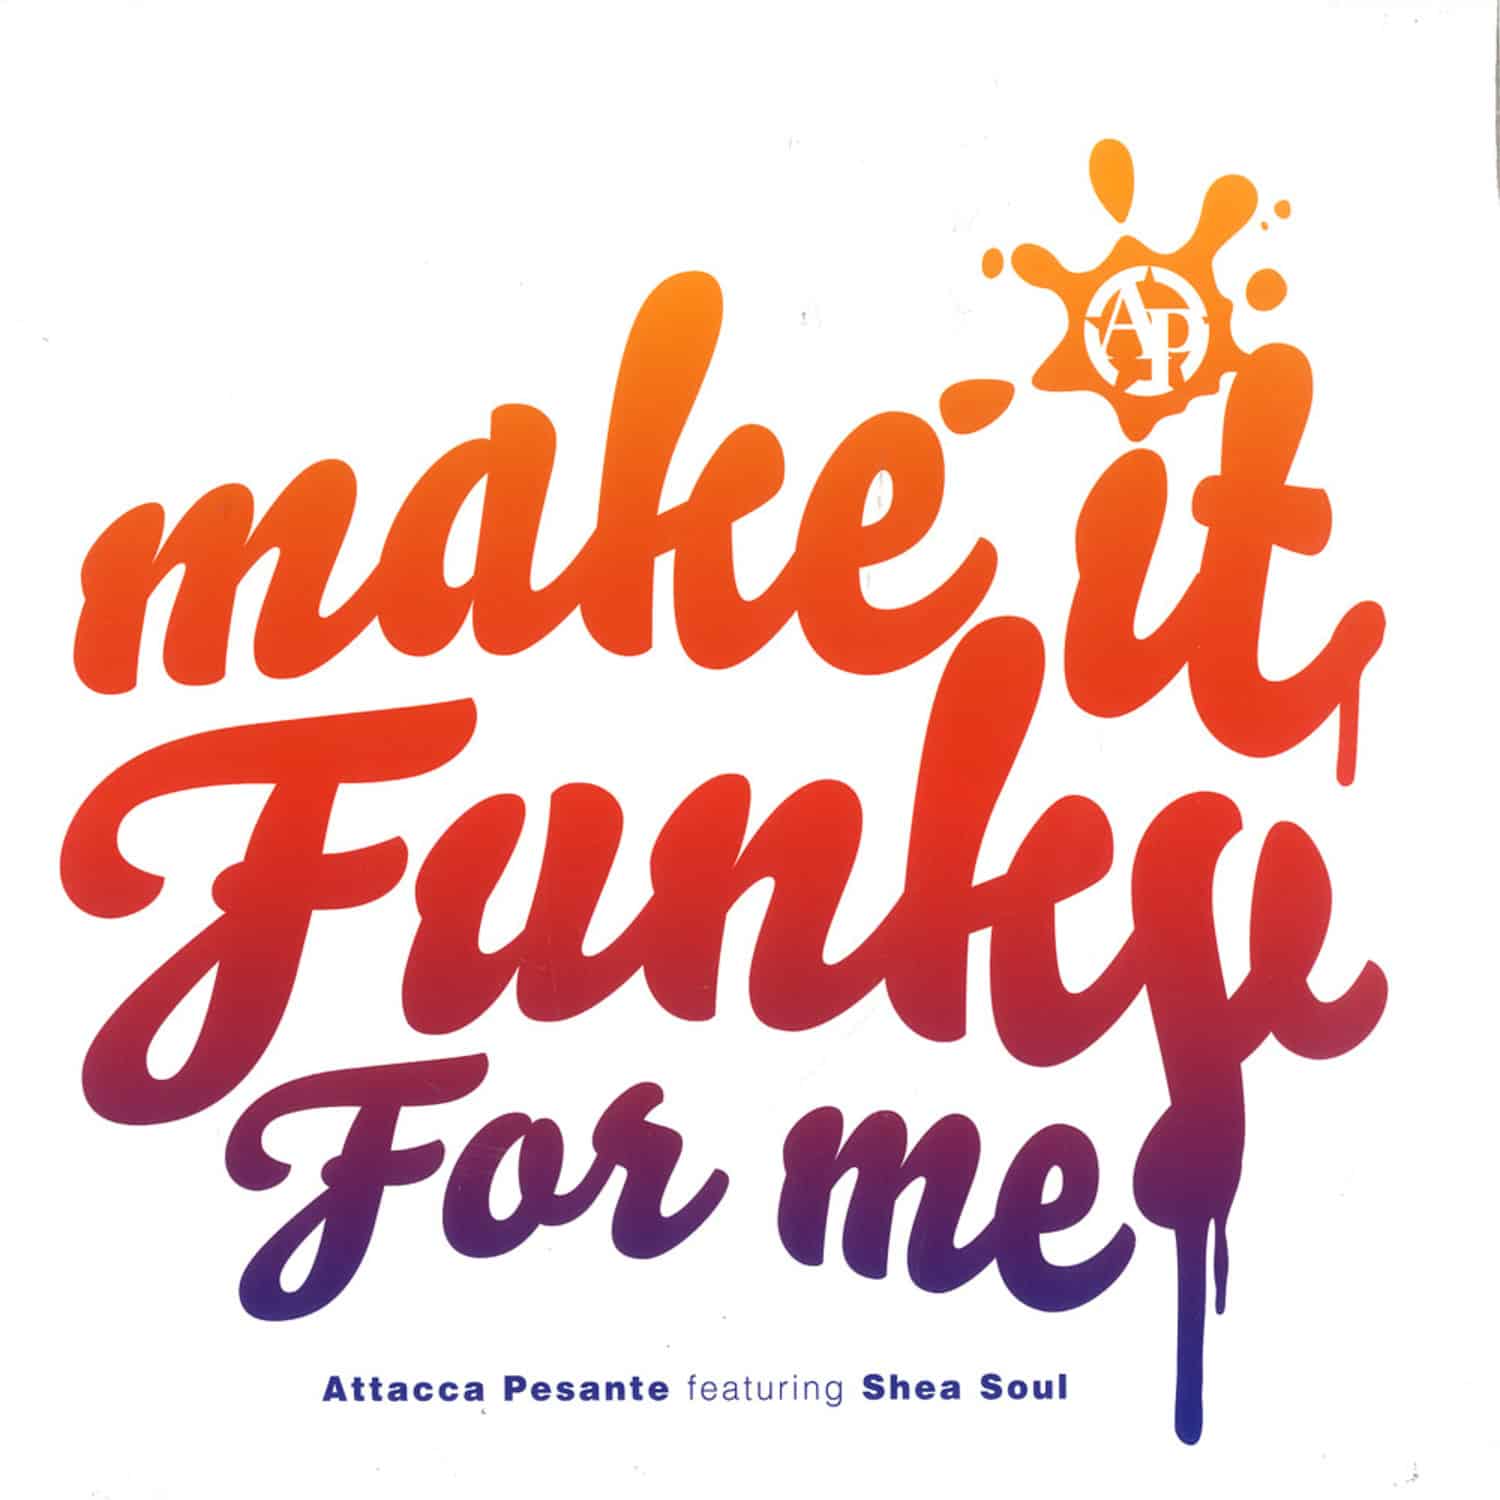 Attacca Pessante - MAKE IT FUNKY 